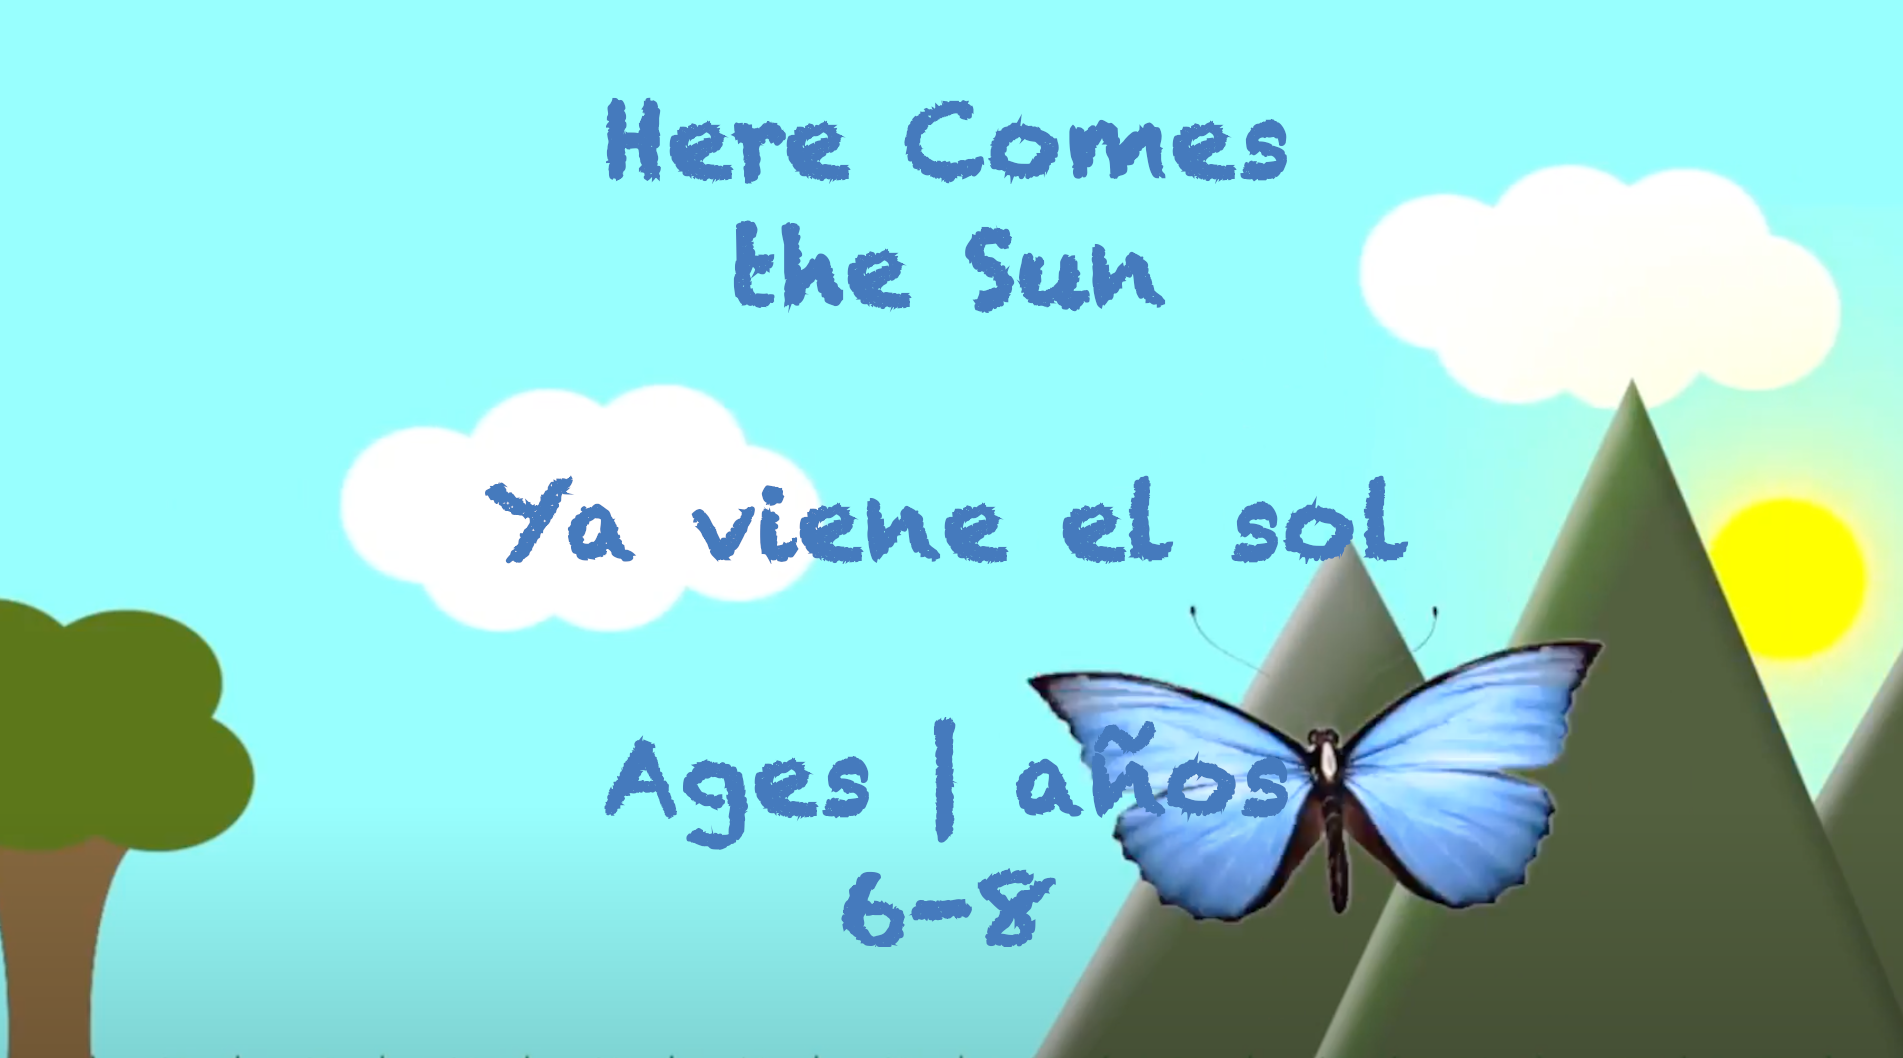 Here Comes the Sun for 6-8 year olds